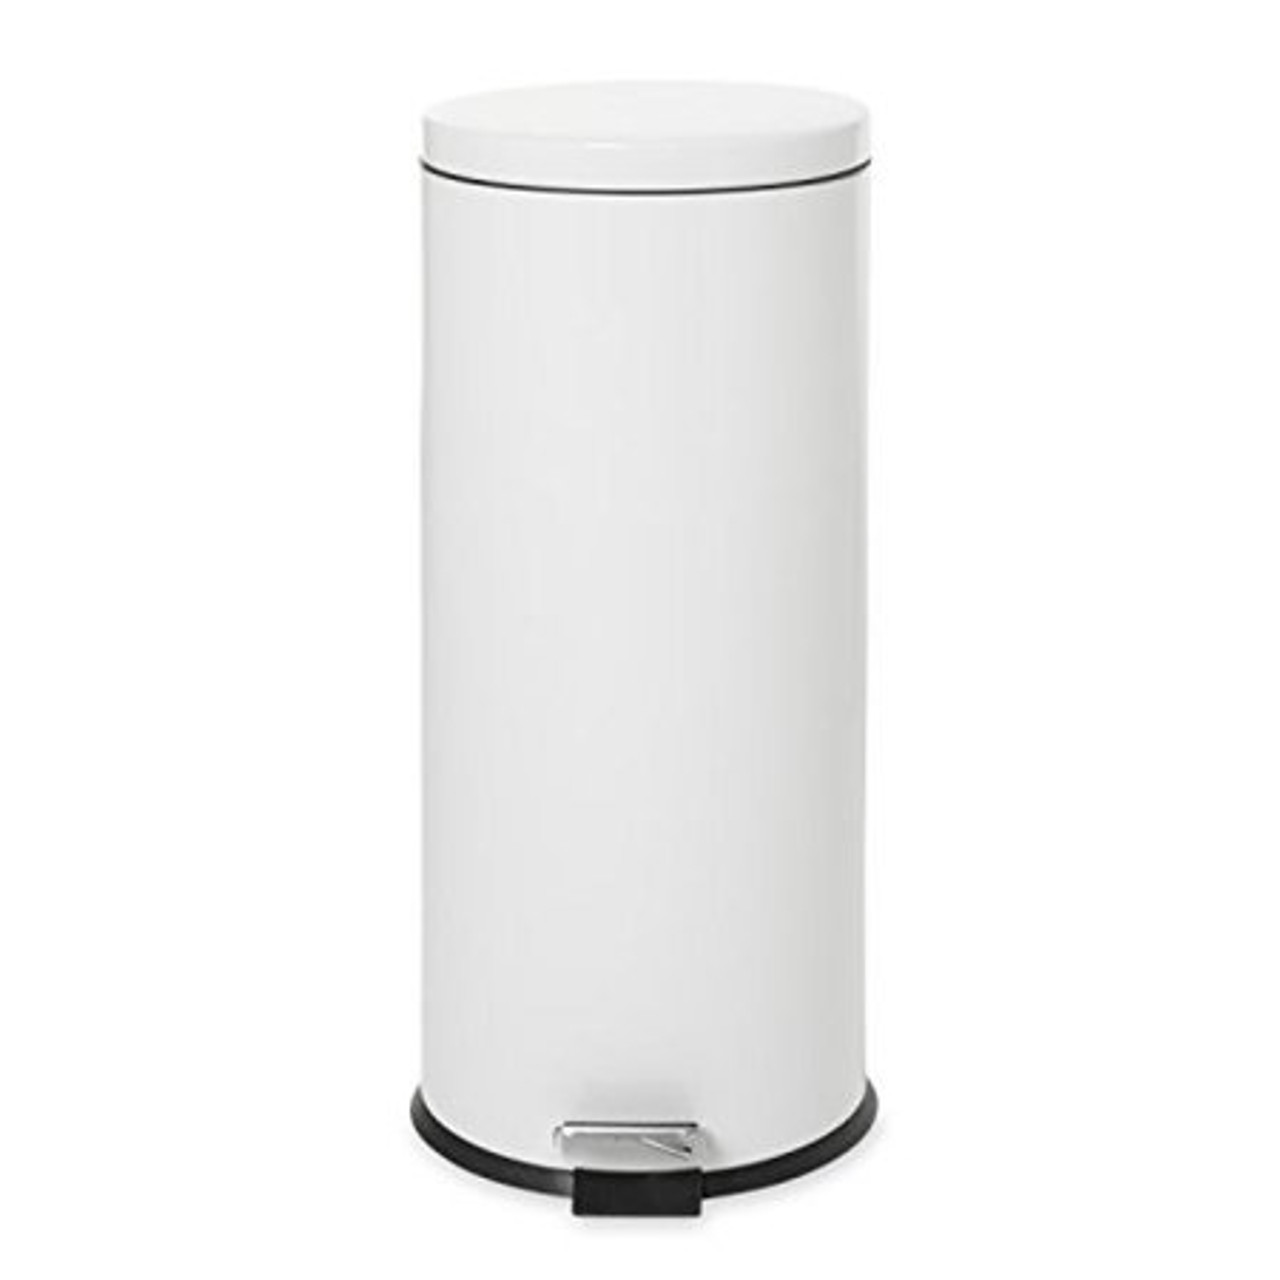 Rubbermaid Small Pedal Bin (With Galvanised Liner) 30.3 L - White - FGMST7EGLWH